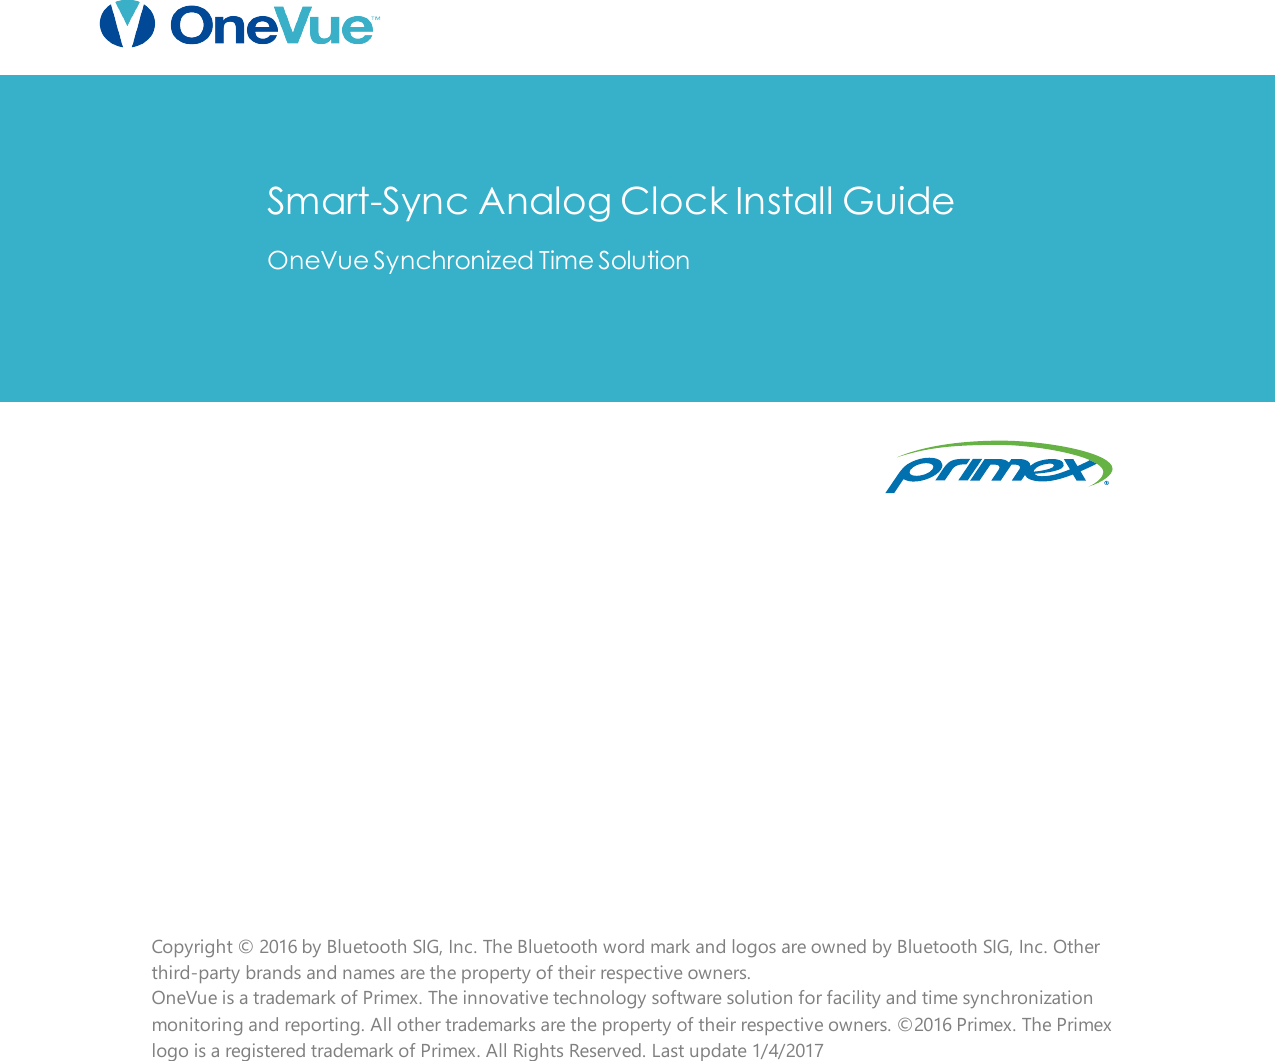 Smart-Sync Analog Clock Install GuideOneVue Synchronized Time SolutionCopyright © 2016 by Bluetooth SIG, Inc. The Bluetooth word mark and logos are owned by Bluetooth SIG, Inc. Otherthird-party brands and names are the property of their respective owners.OneVue is a trademark of Primex. The innovative technology software solution for facility and time synchronizationmonitoring and reporting. All other trademarks are the property of their respective owners. ©2016 Primex. The Primexlogo is a registered trademark of Primex. All Rights Reserved. Last update 1/4/2017